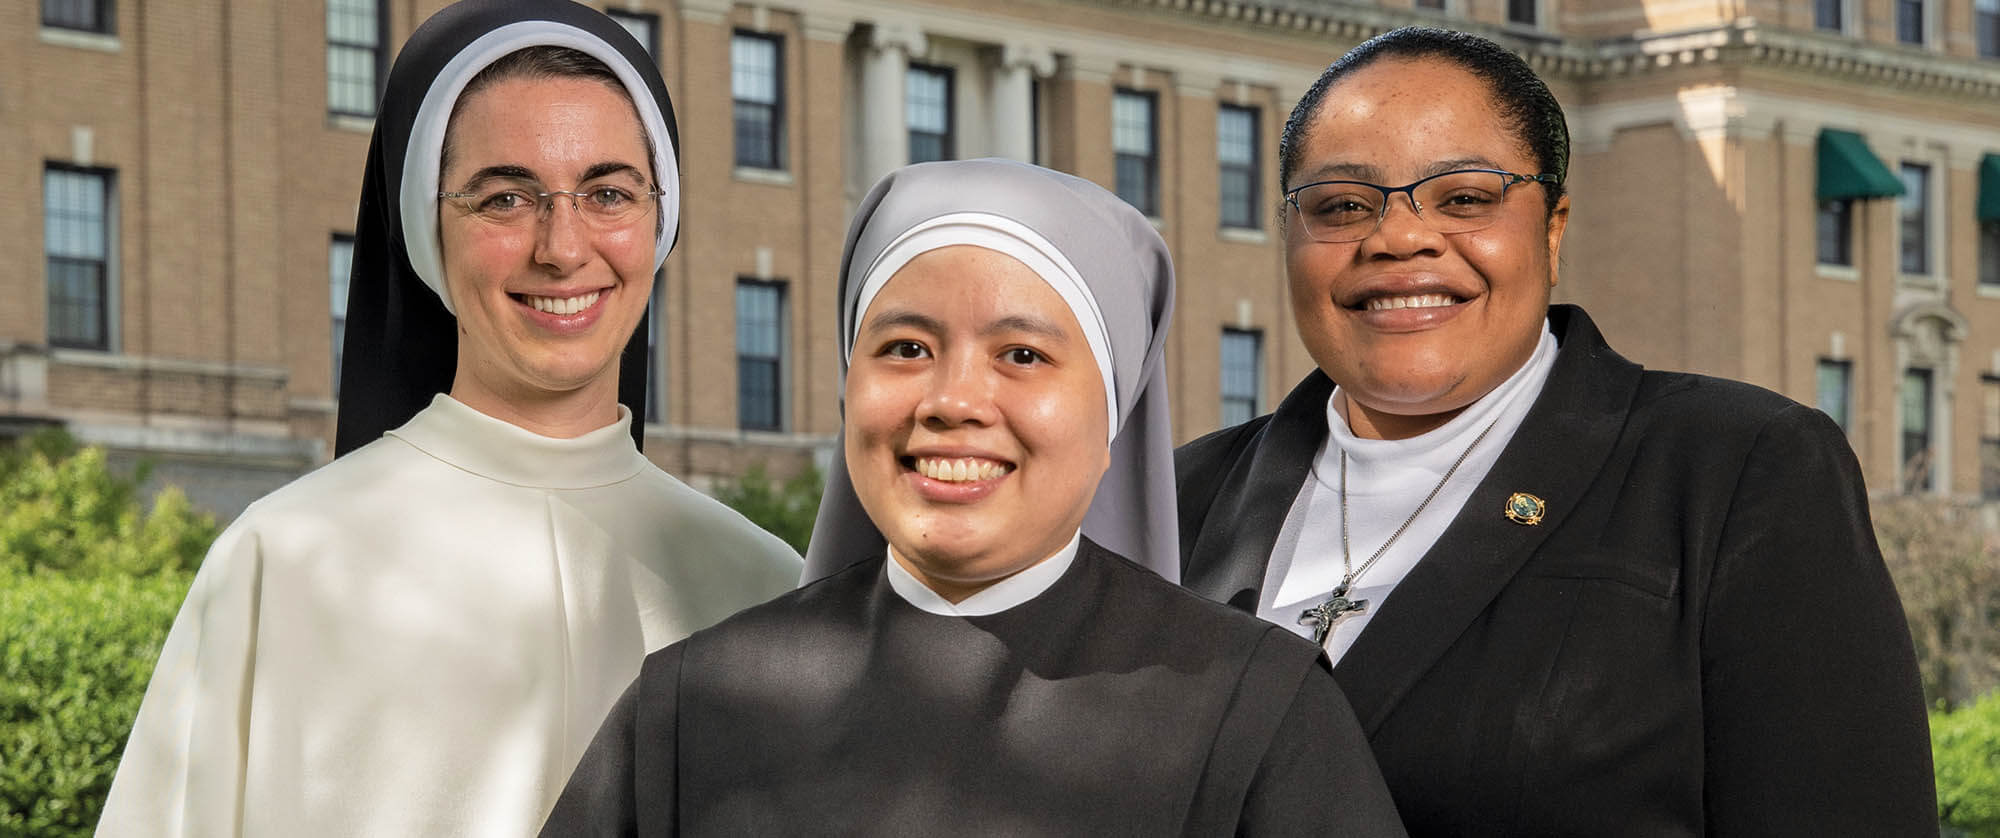 Journeys’ end: Religious vocations offer enduring appeal to young women